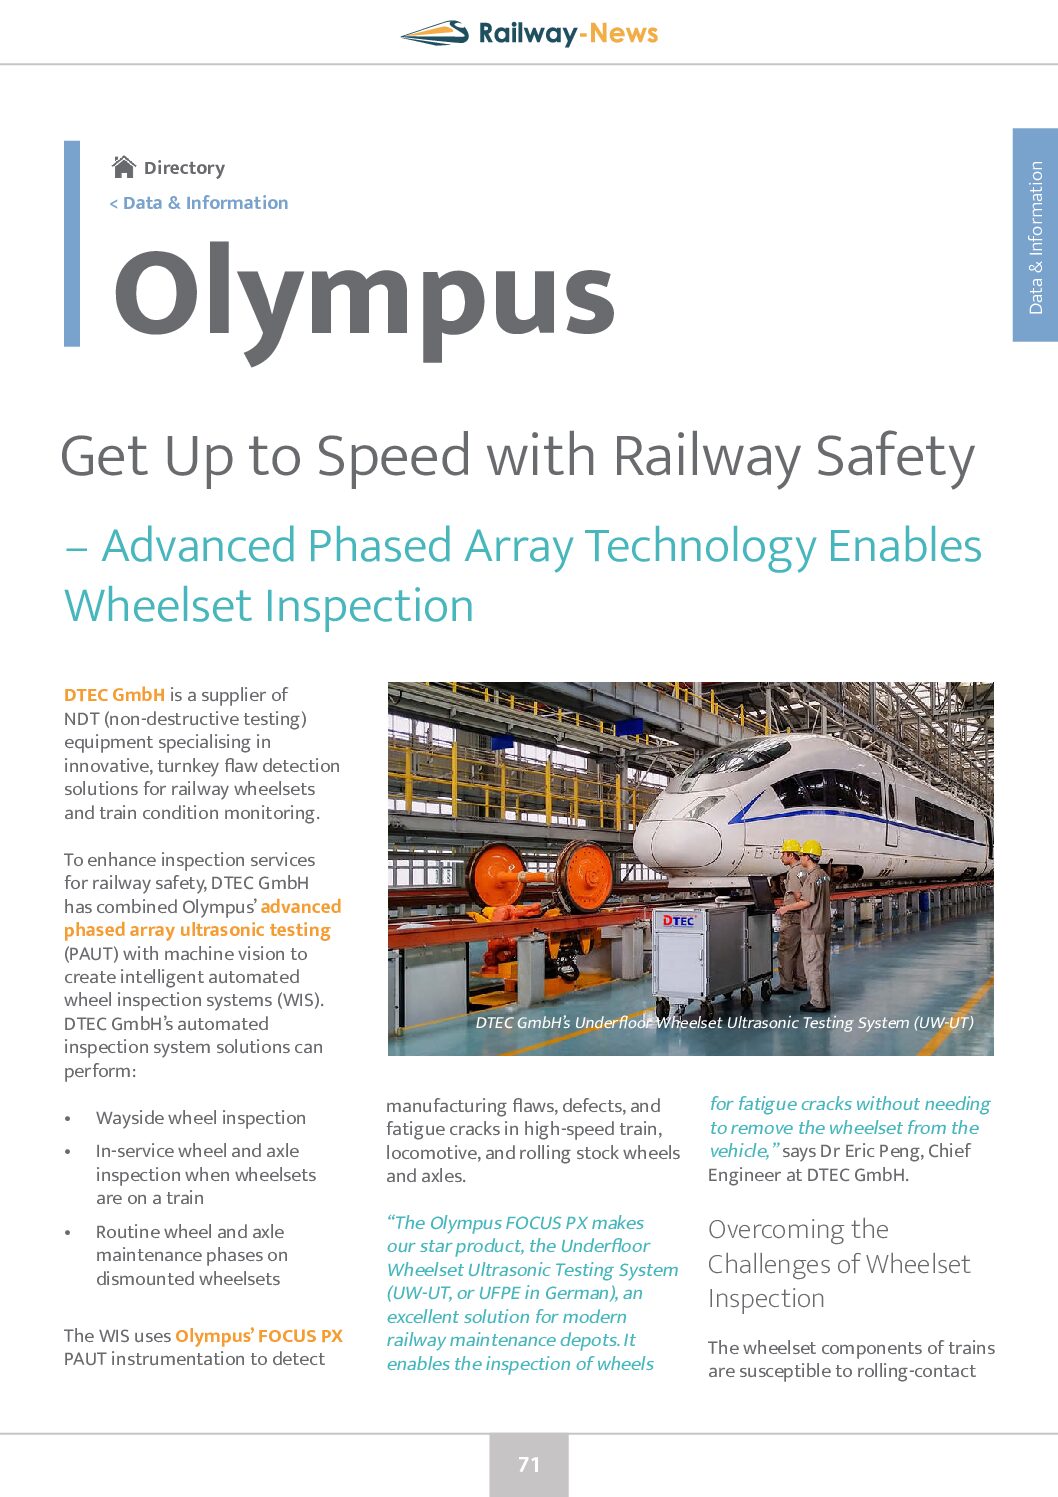 Olympus – Get Up to Speed with Railway Safety